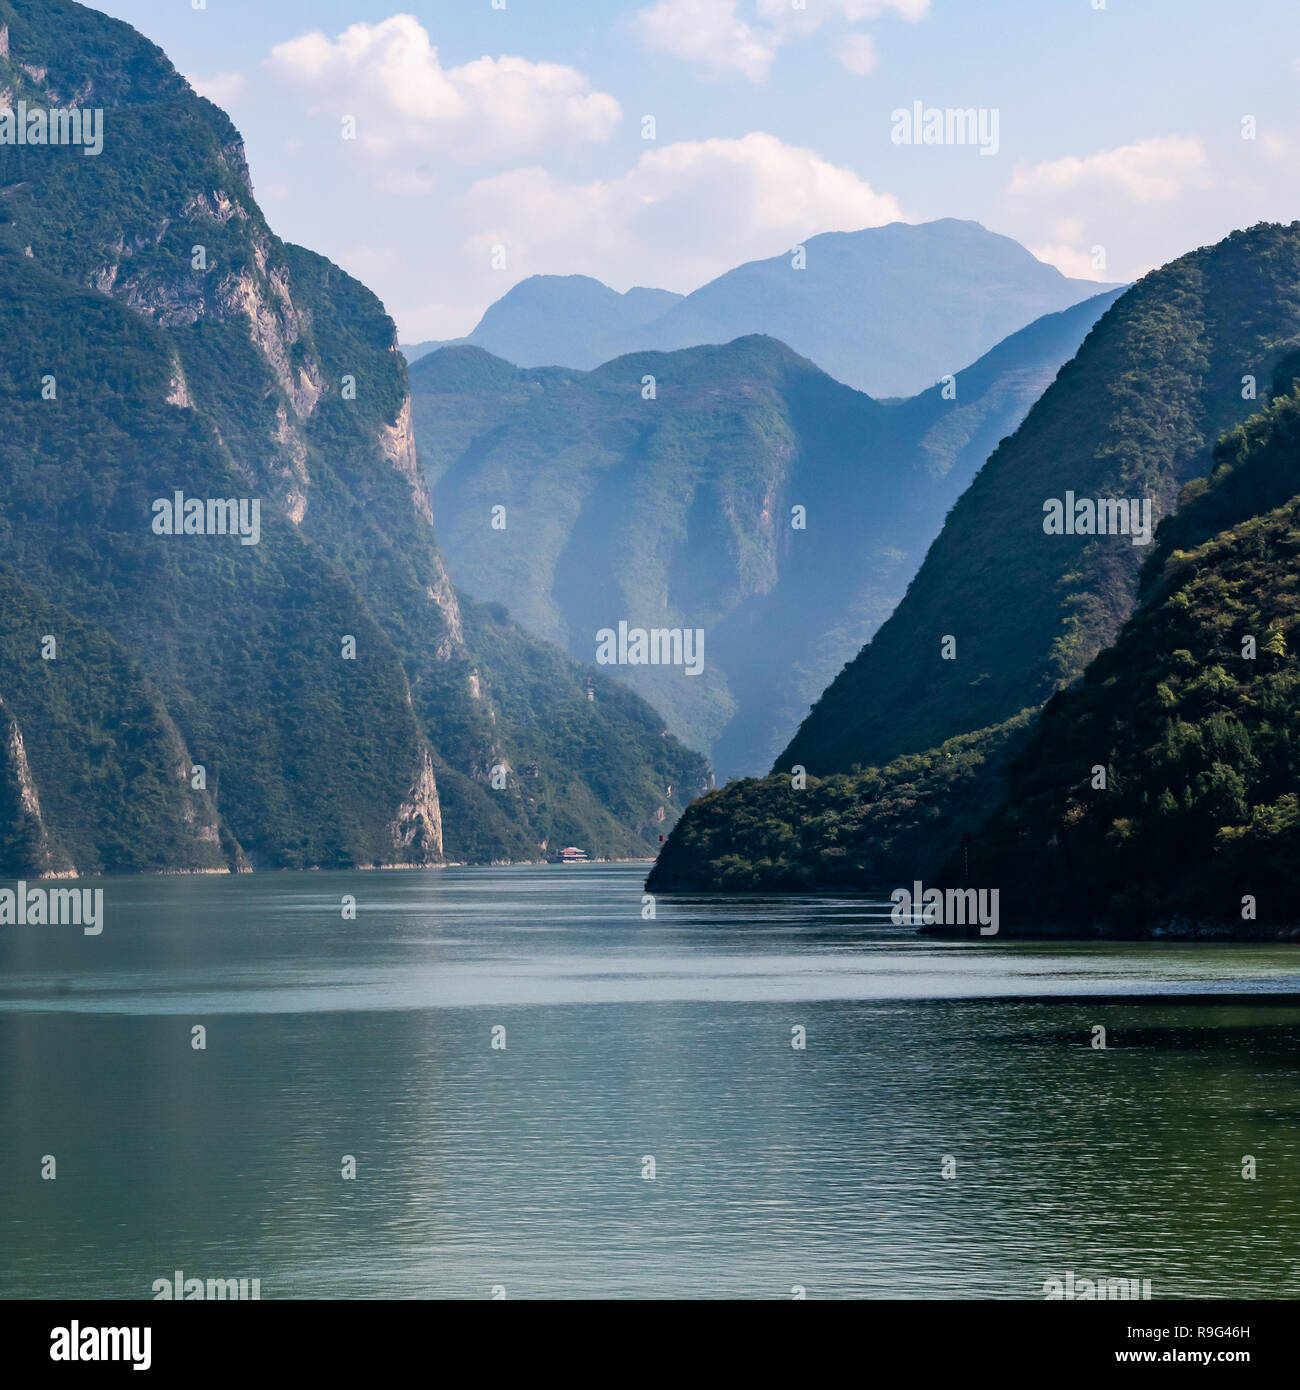 View of the Wu gorge on the Yangtze River - china Stock Photo